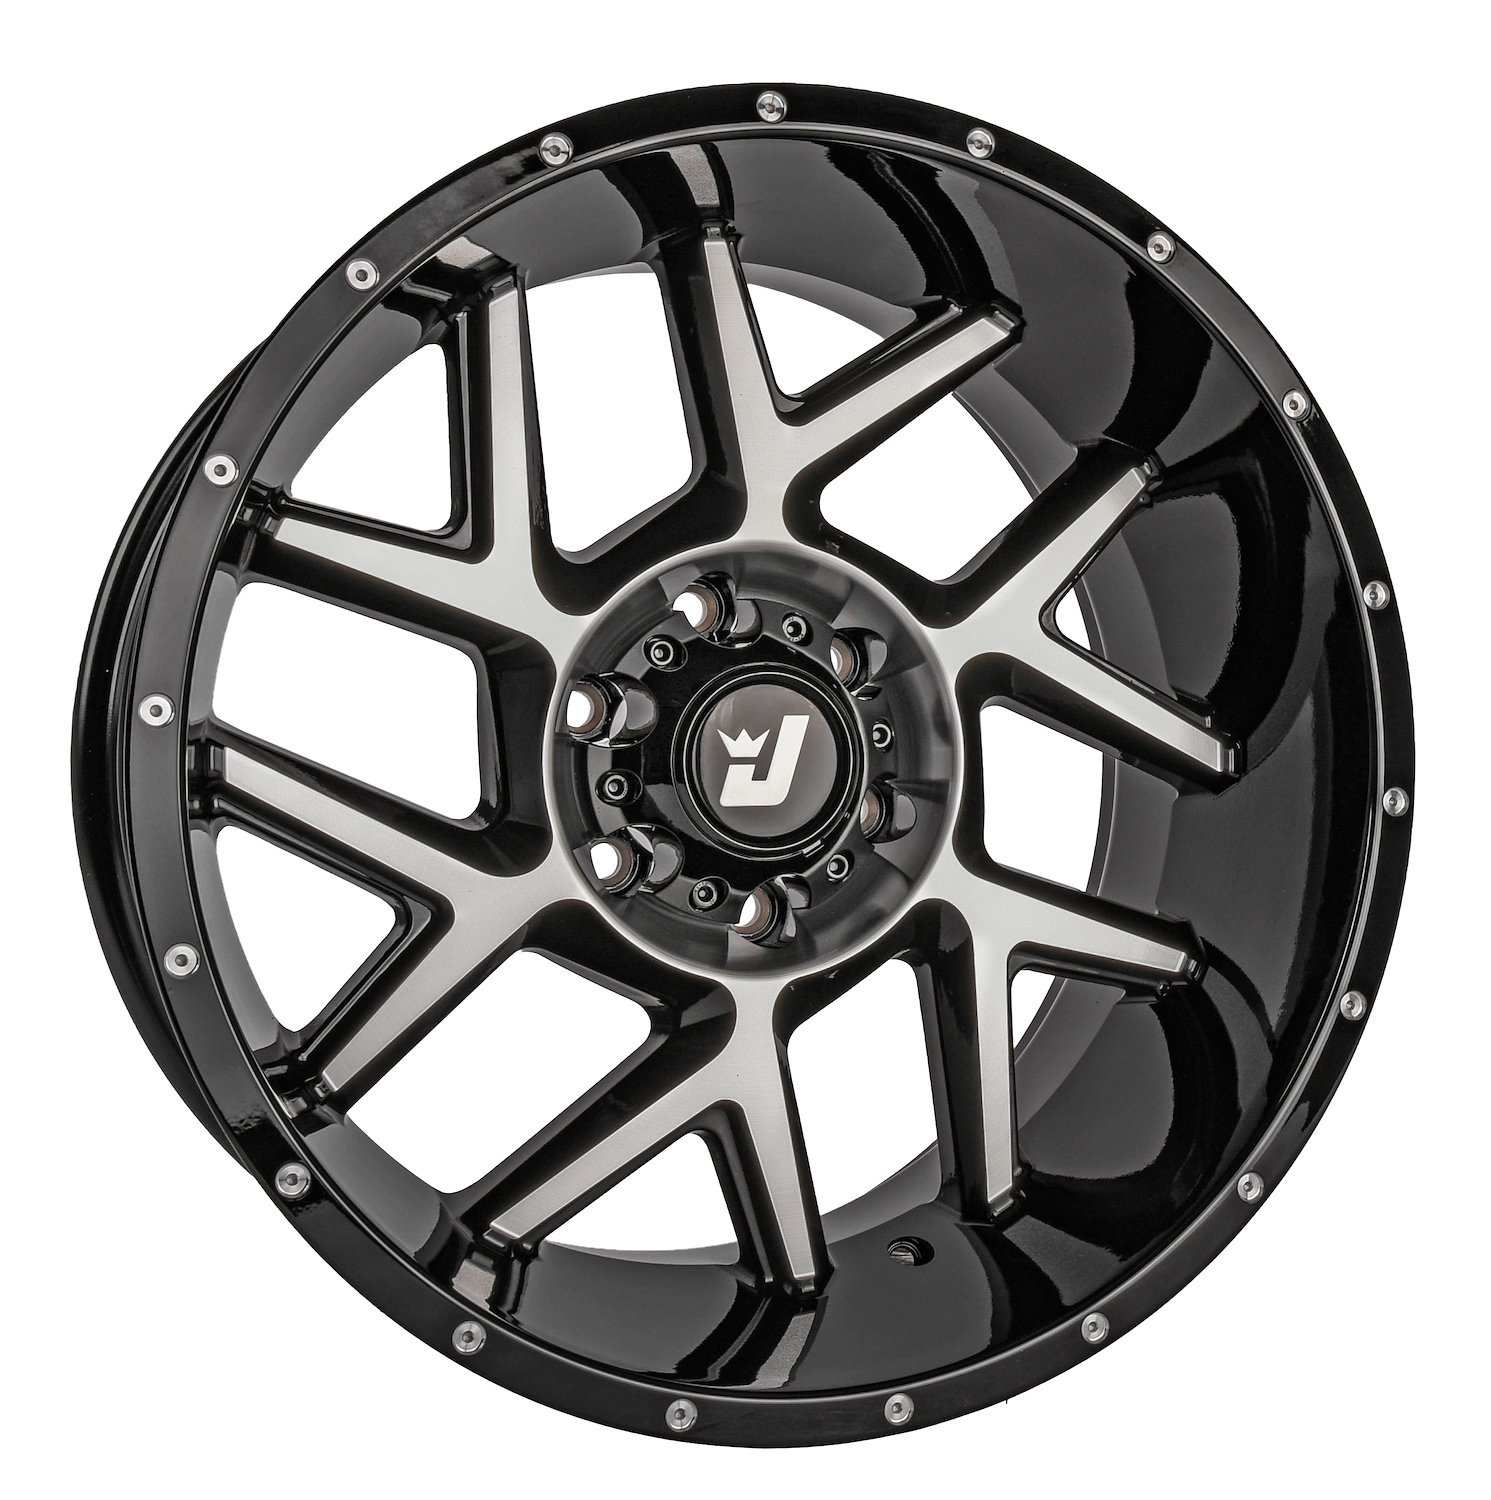 Reactor Wheel [Size: 20" x 10"] Gloss Black with Milled Spokes